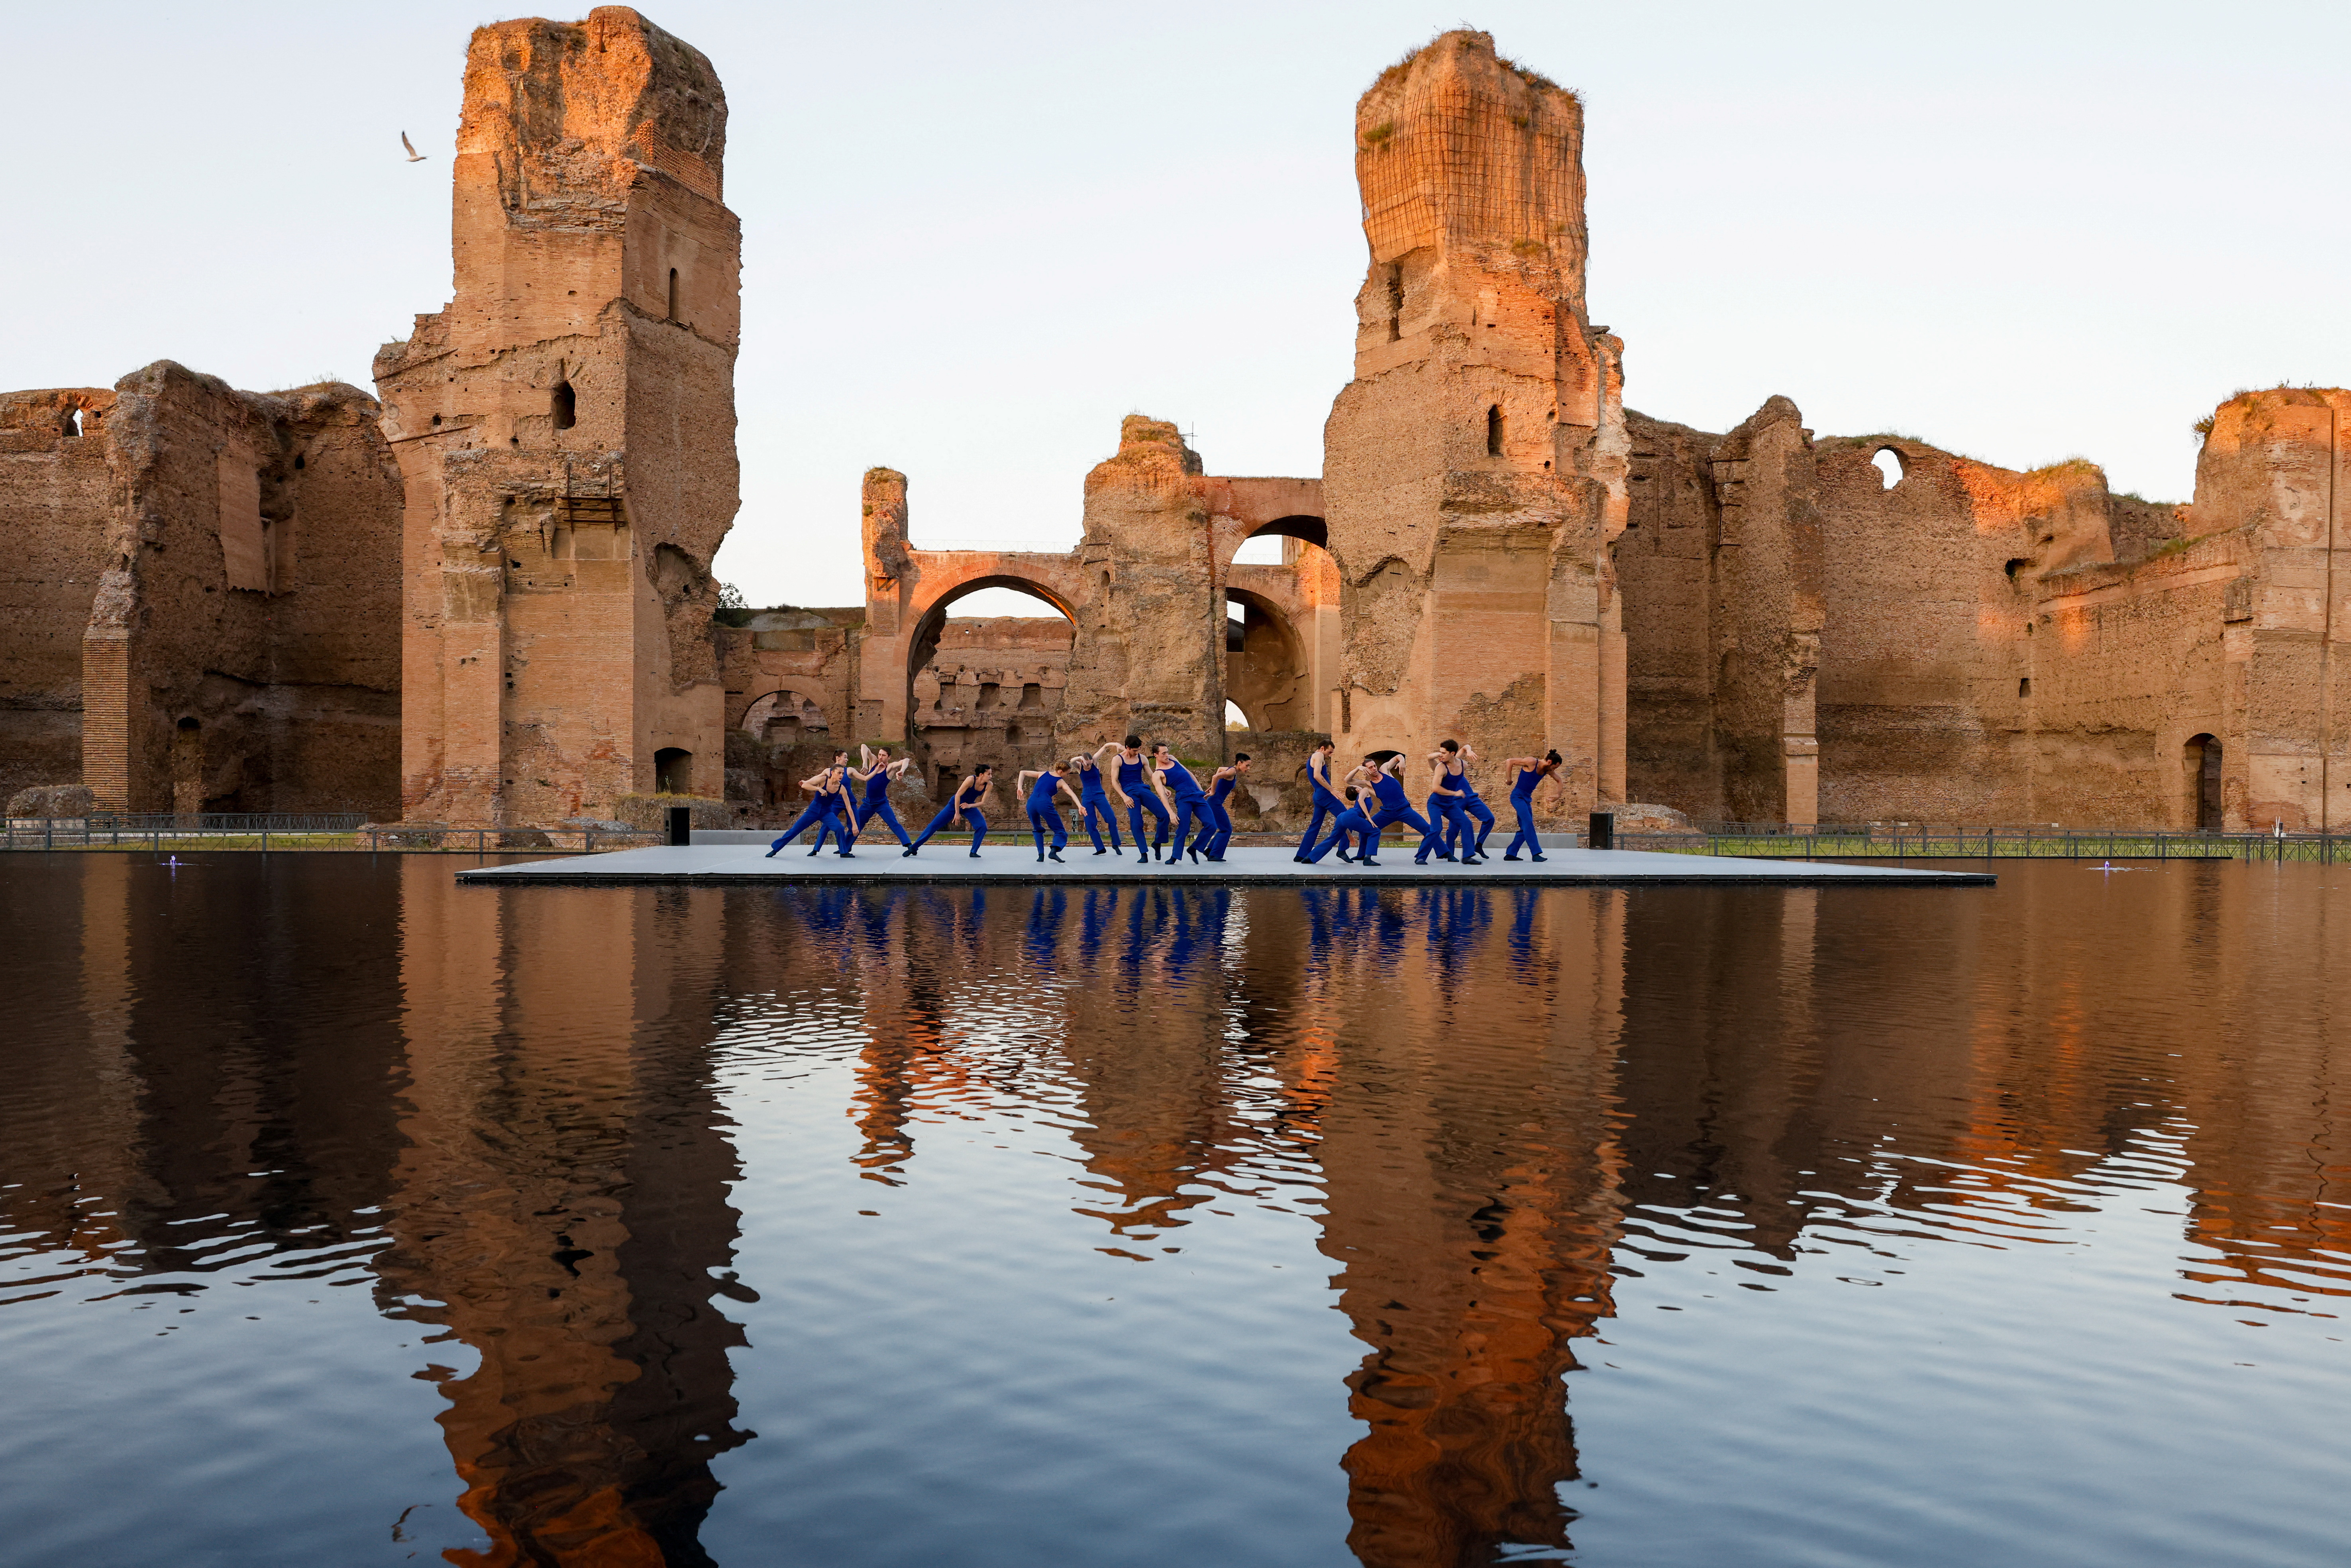 Inauguration of a special pool at the Baths of Caracalla